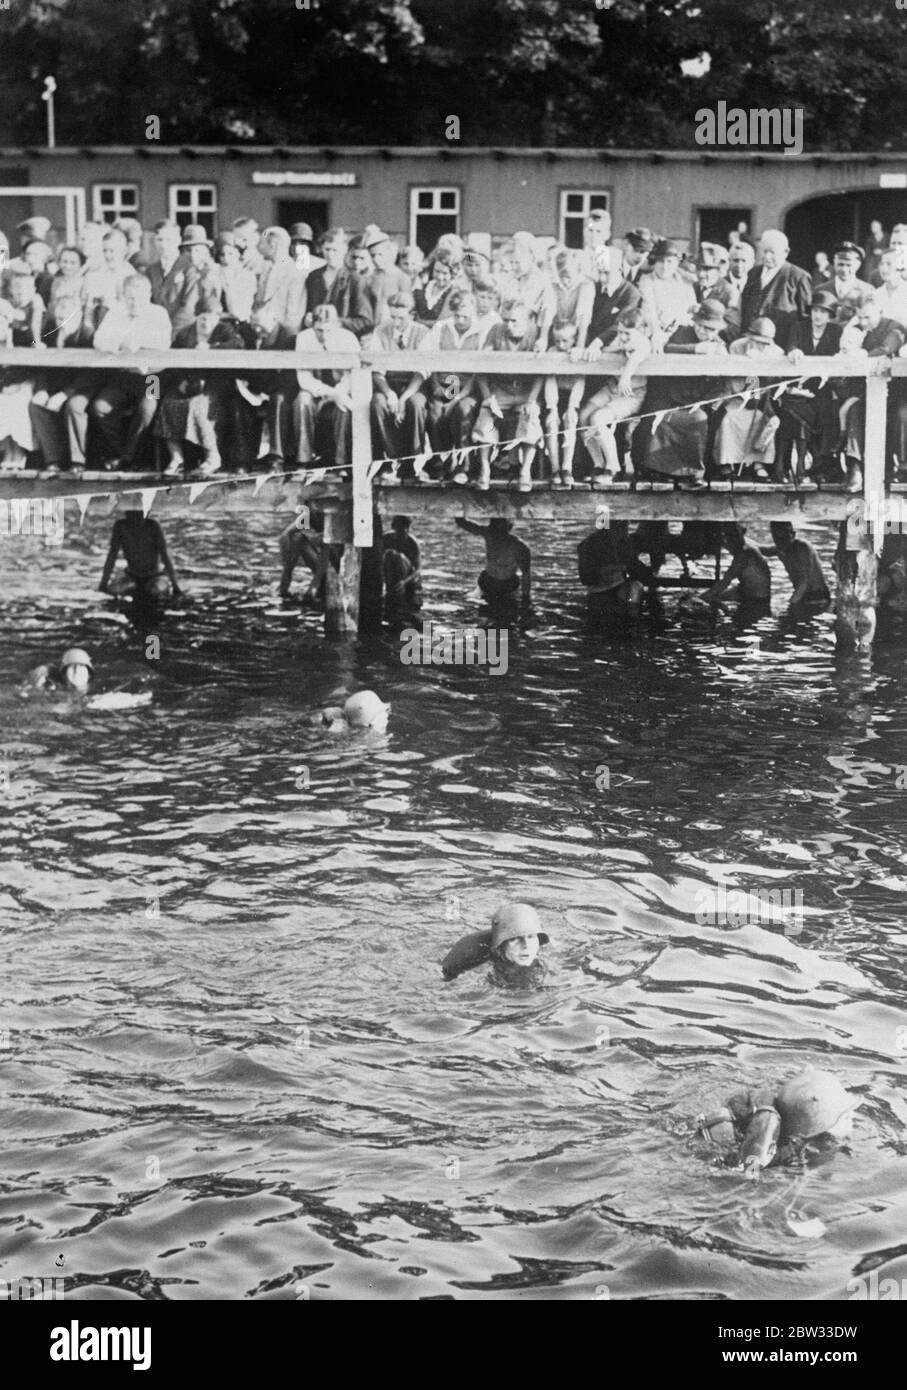 Germany army holds water festival . Soldiers in full kit swimming in a race during the German Army ' s water festival at Spandau , Germany , which was watched by large crowds . 2 August 1932 Stock Photo